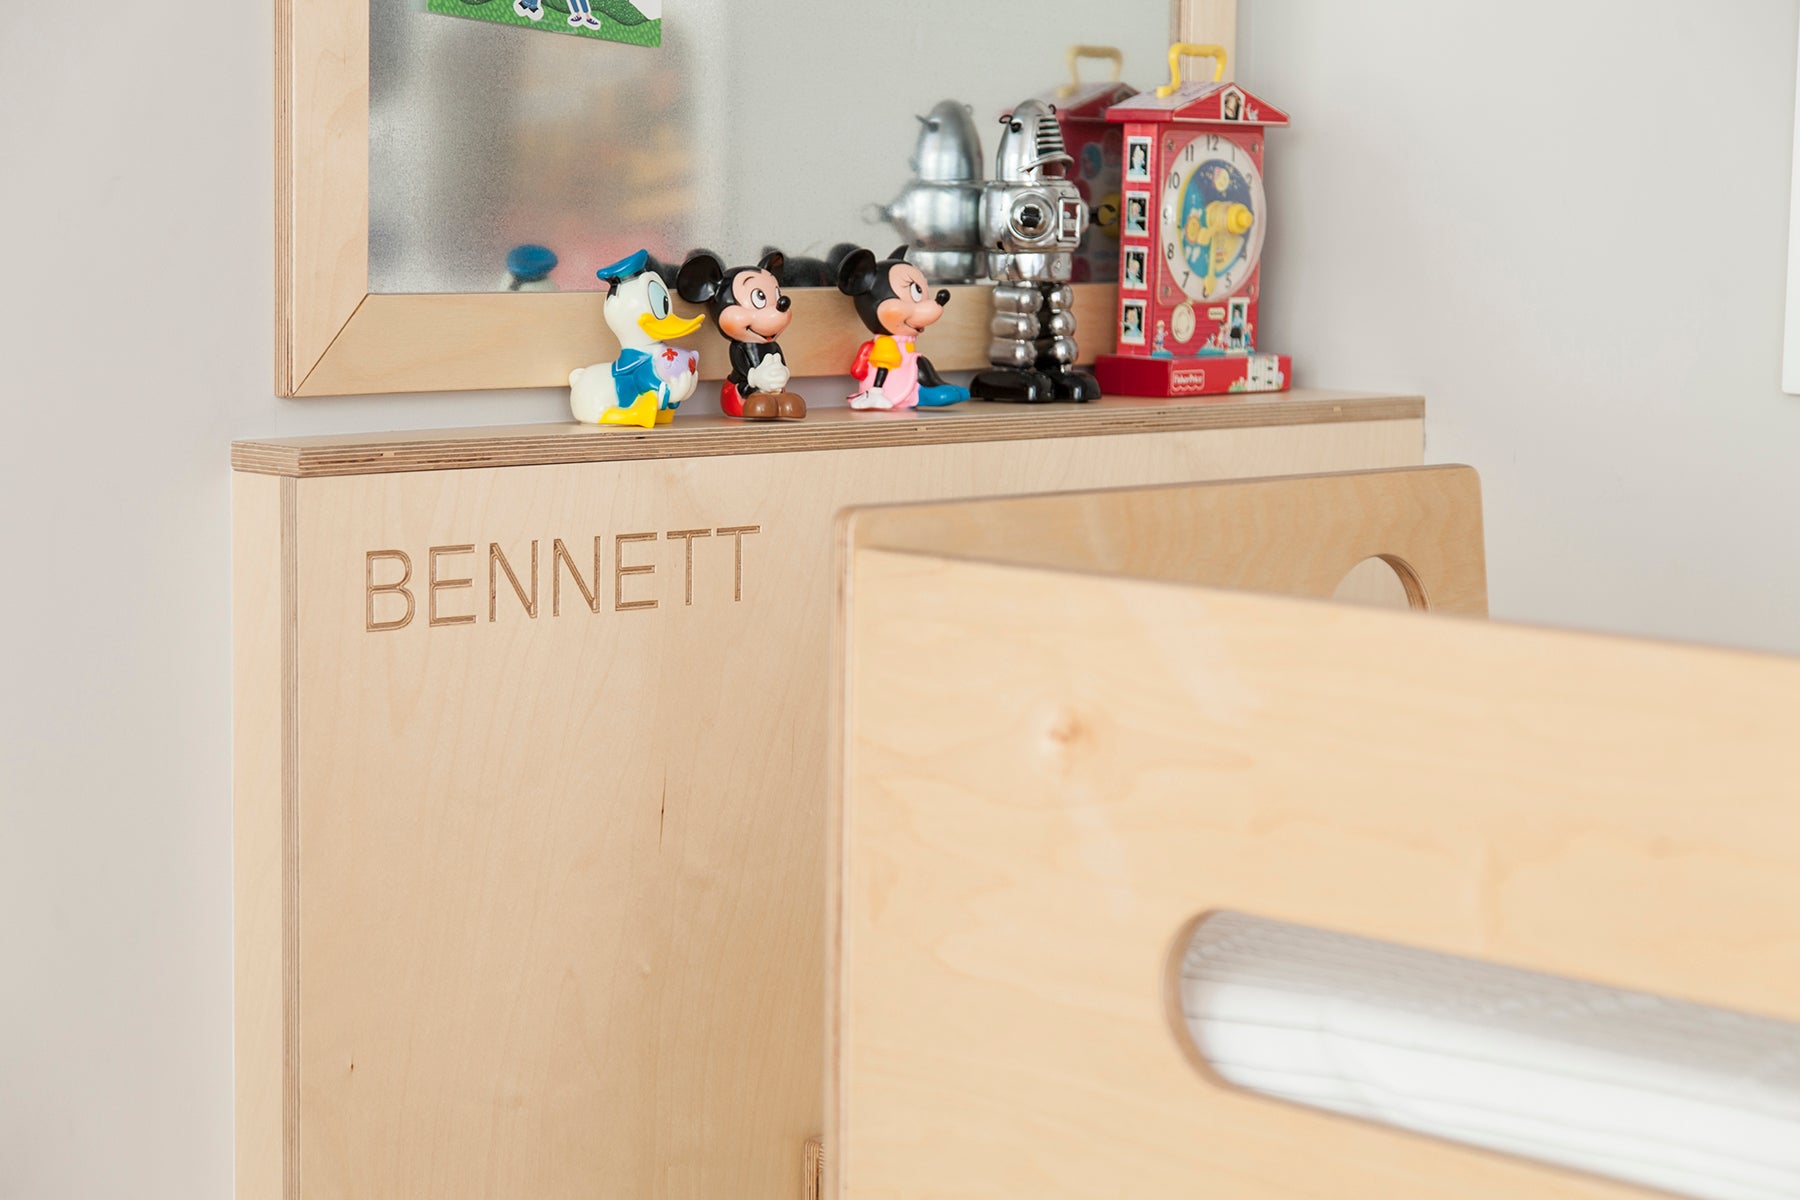 Wooden toy box with ‘BENNETT’ and toys on top.